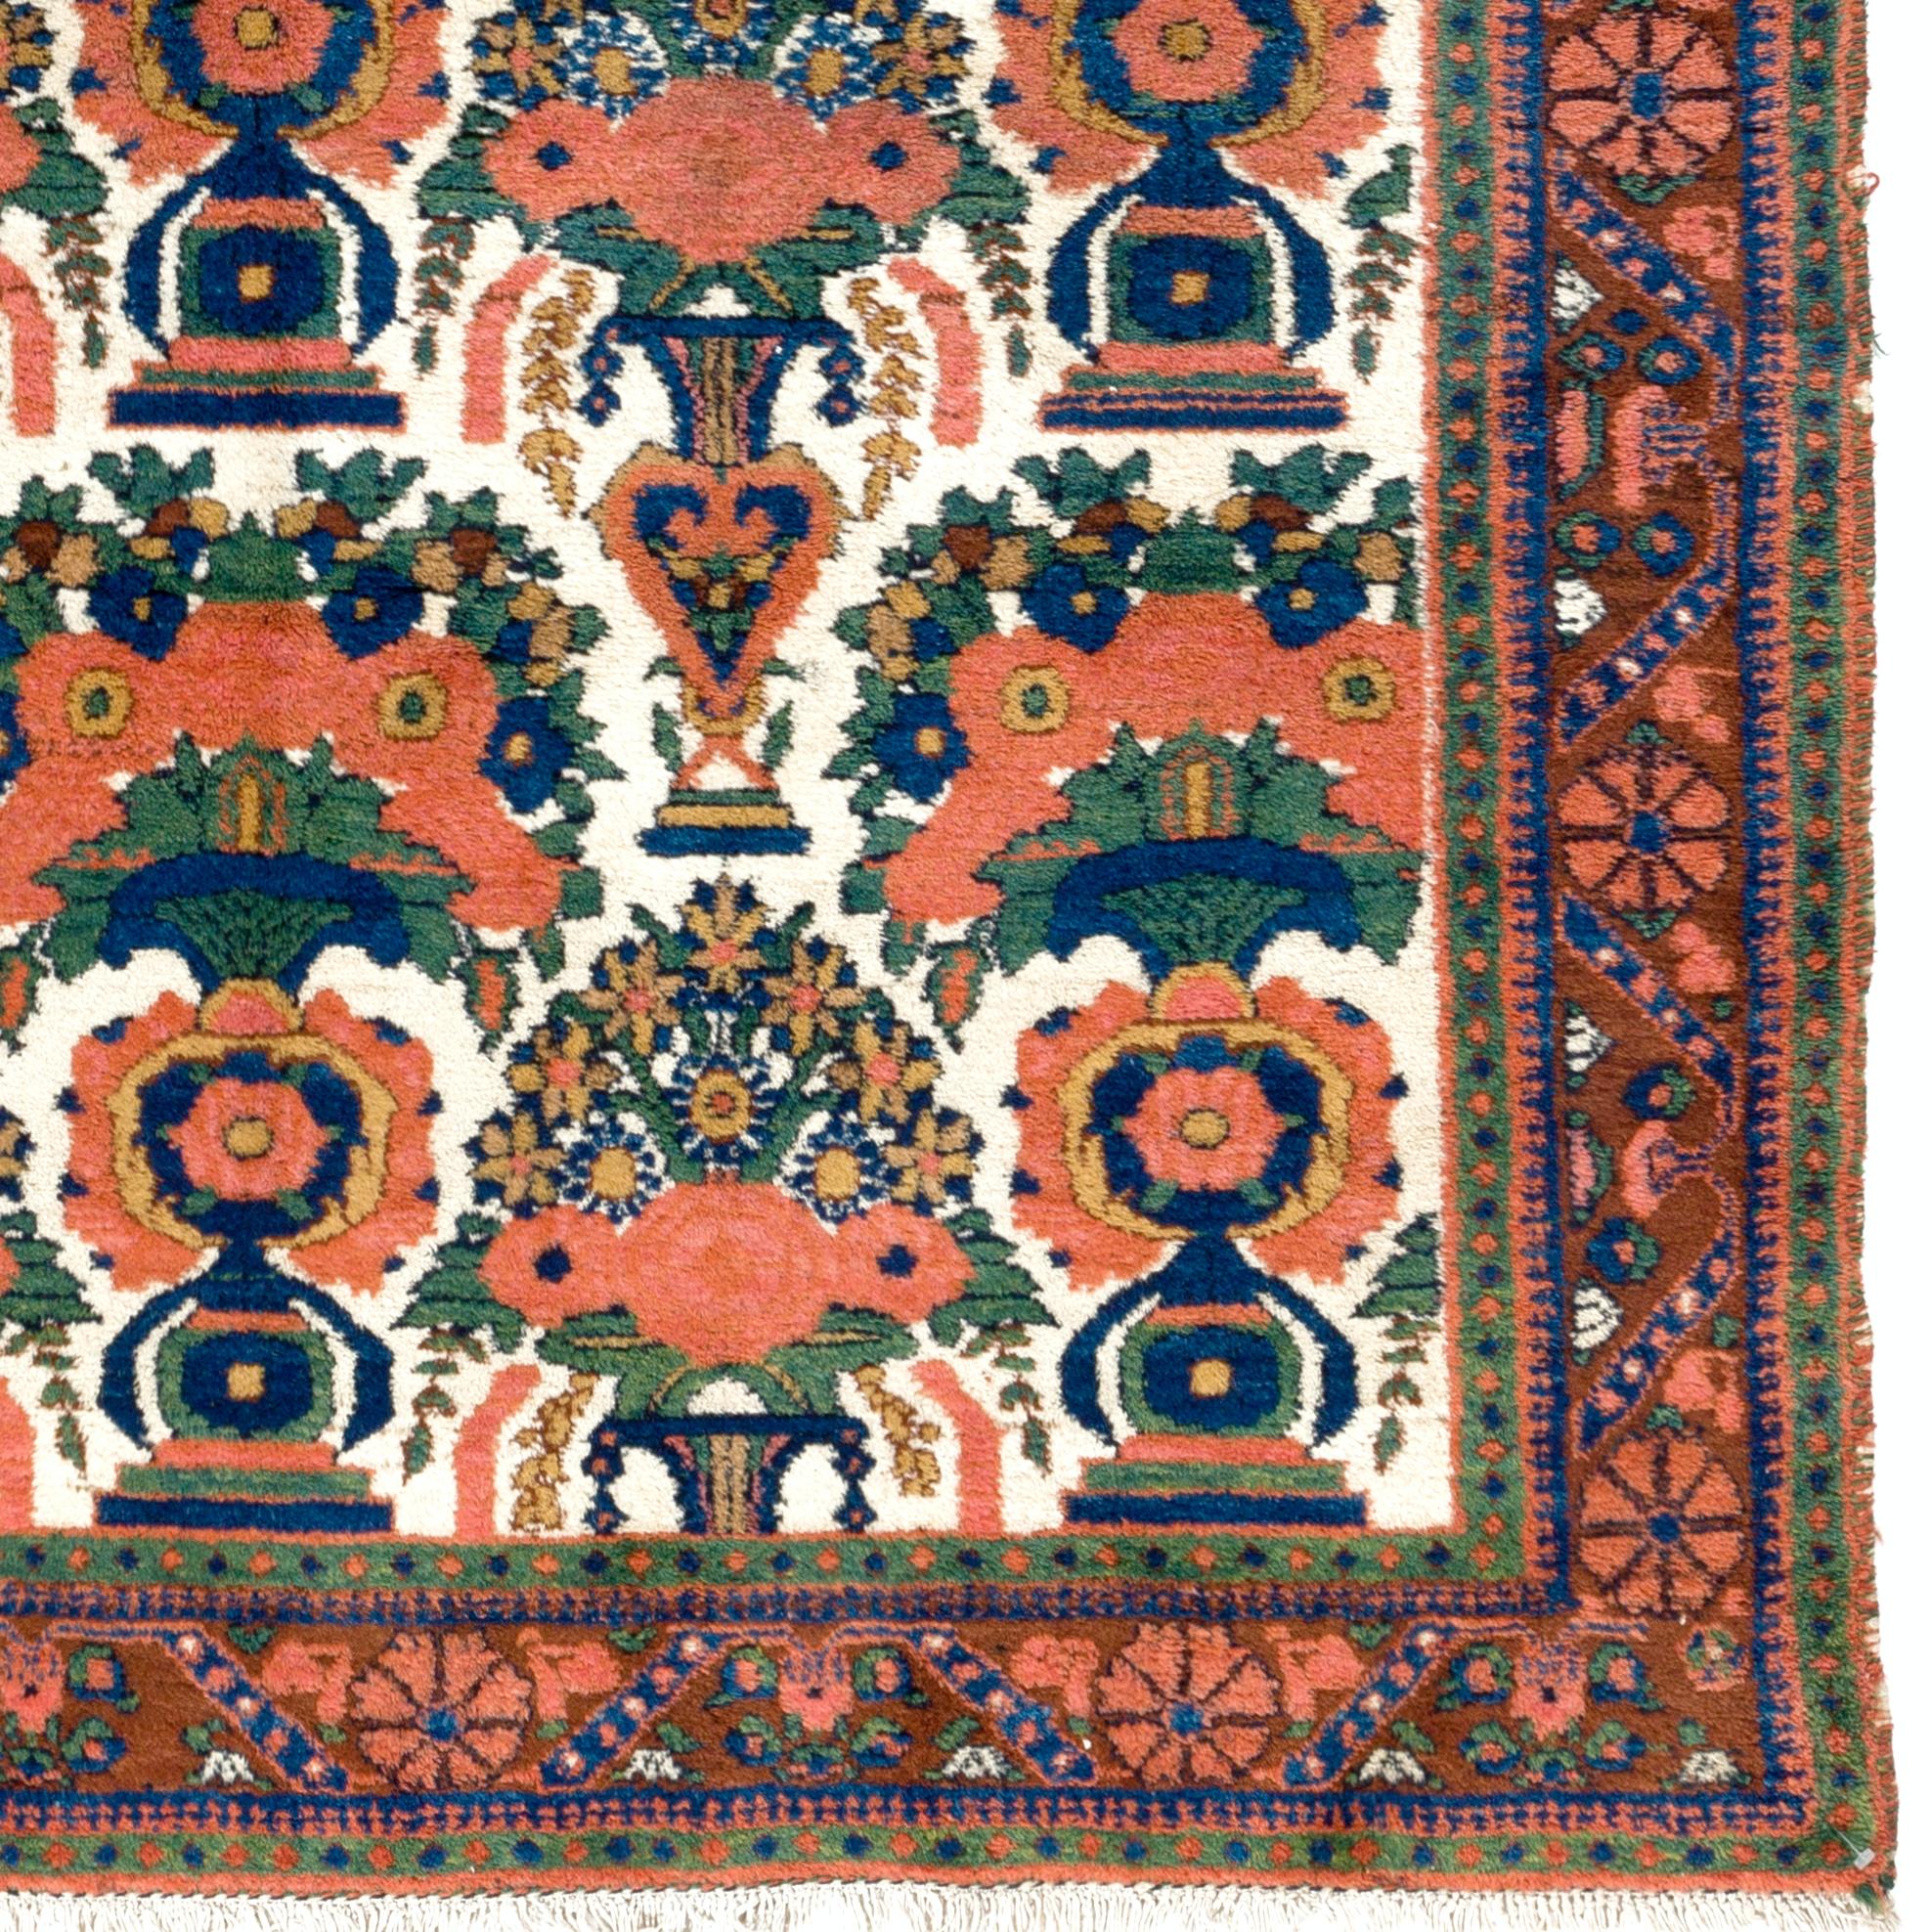 Early 20th Century 4.8x6.3 ft Antique Persian Tribal Afshar Rug, Excellent Original Condition For Sale